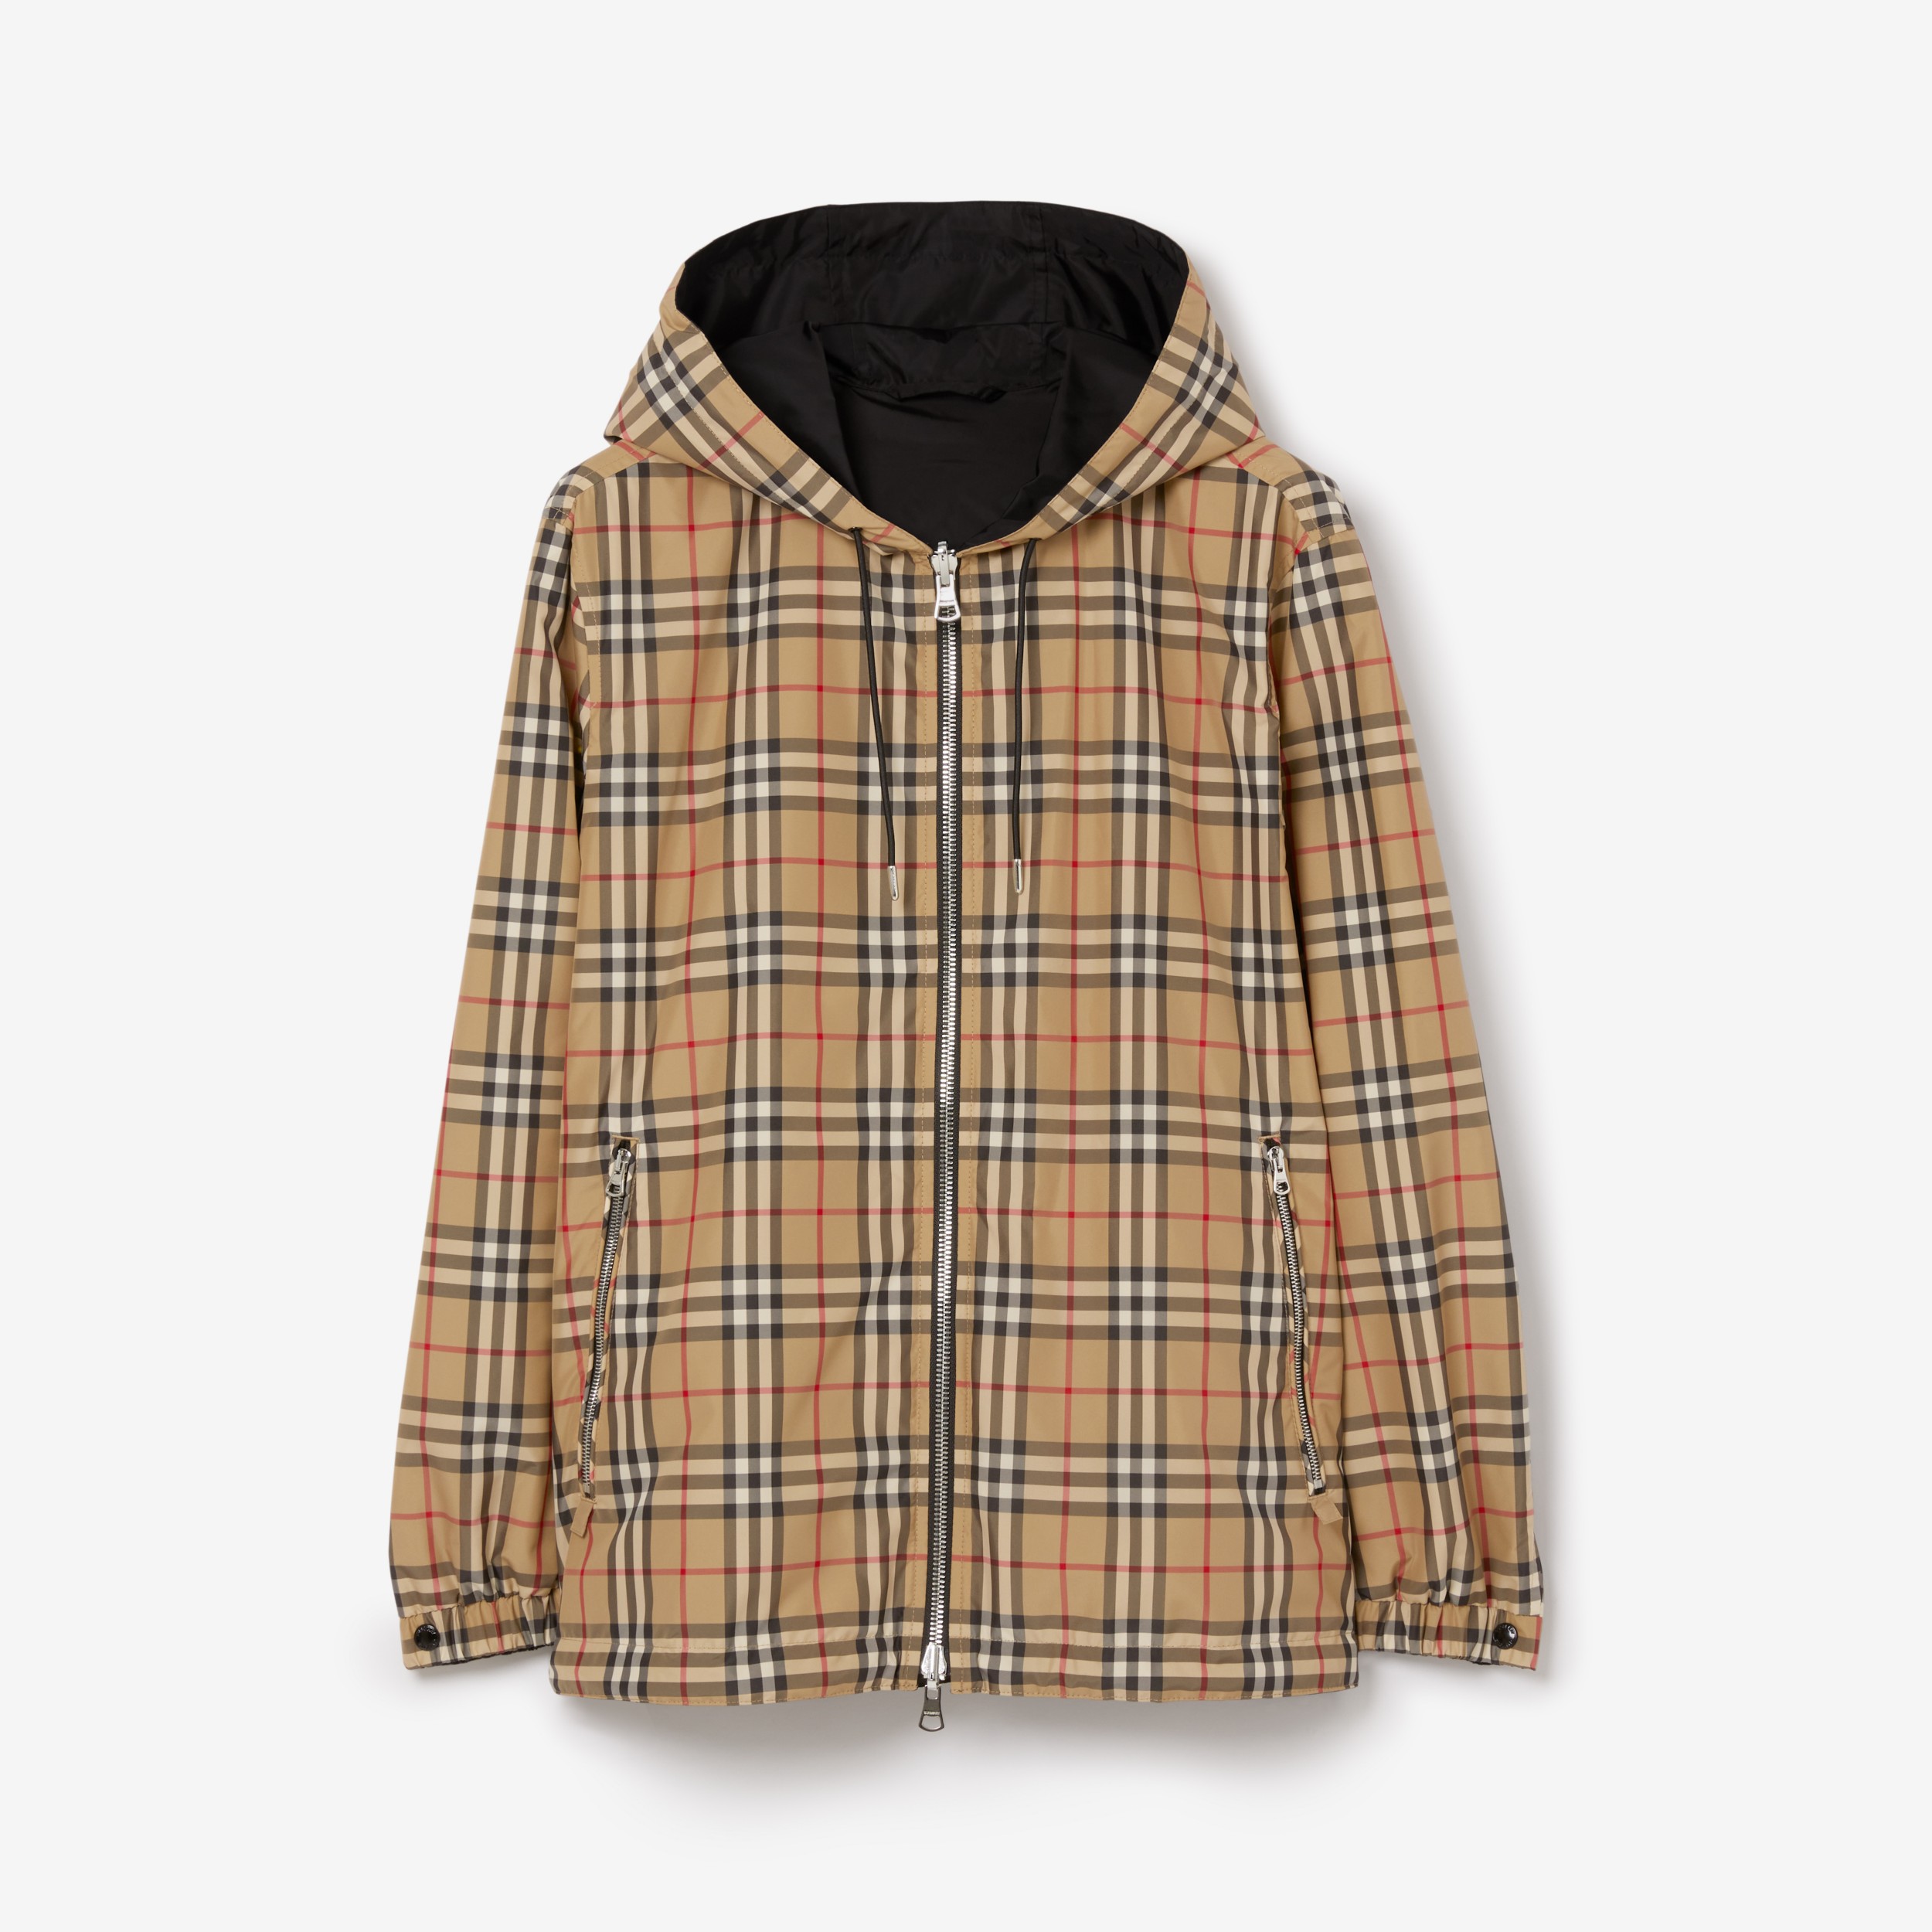 Arriba 52+ imagen how much is a burberry jacket